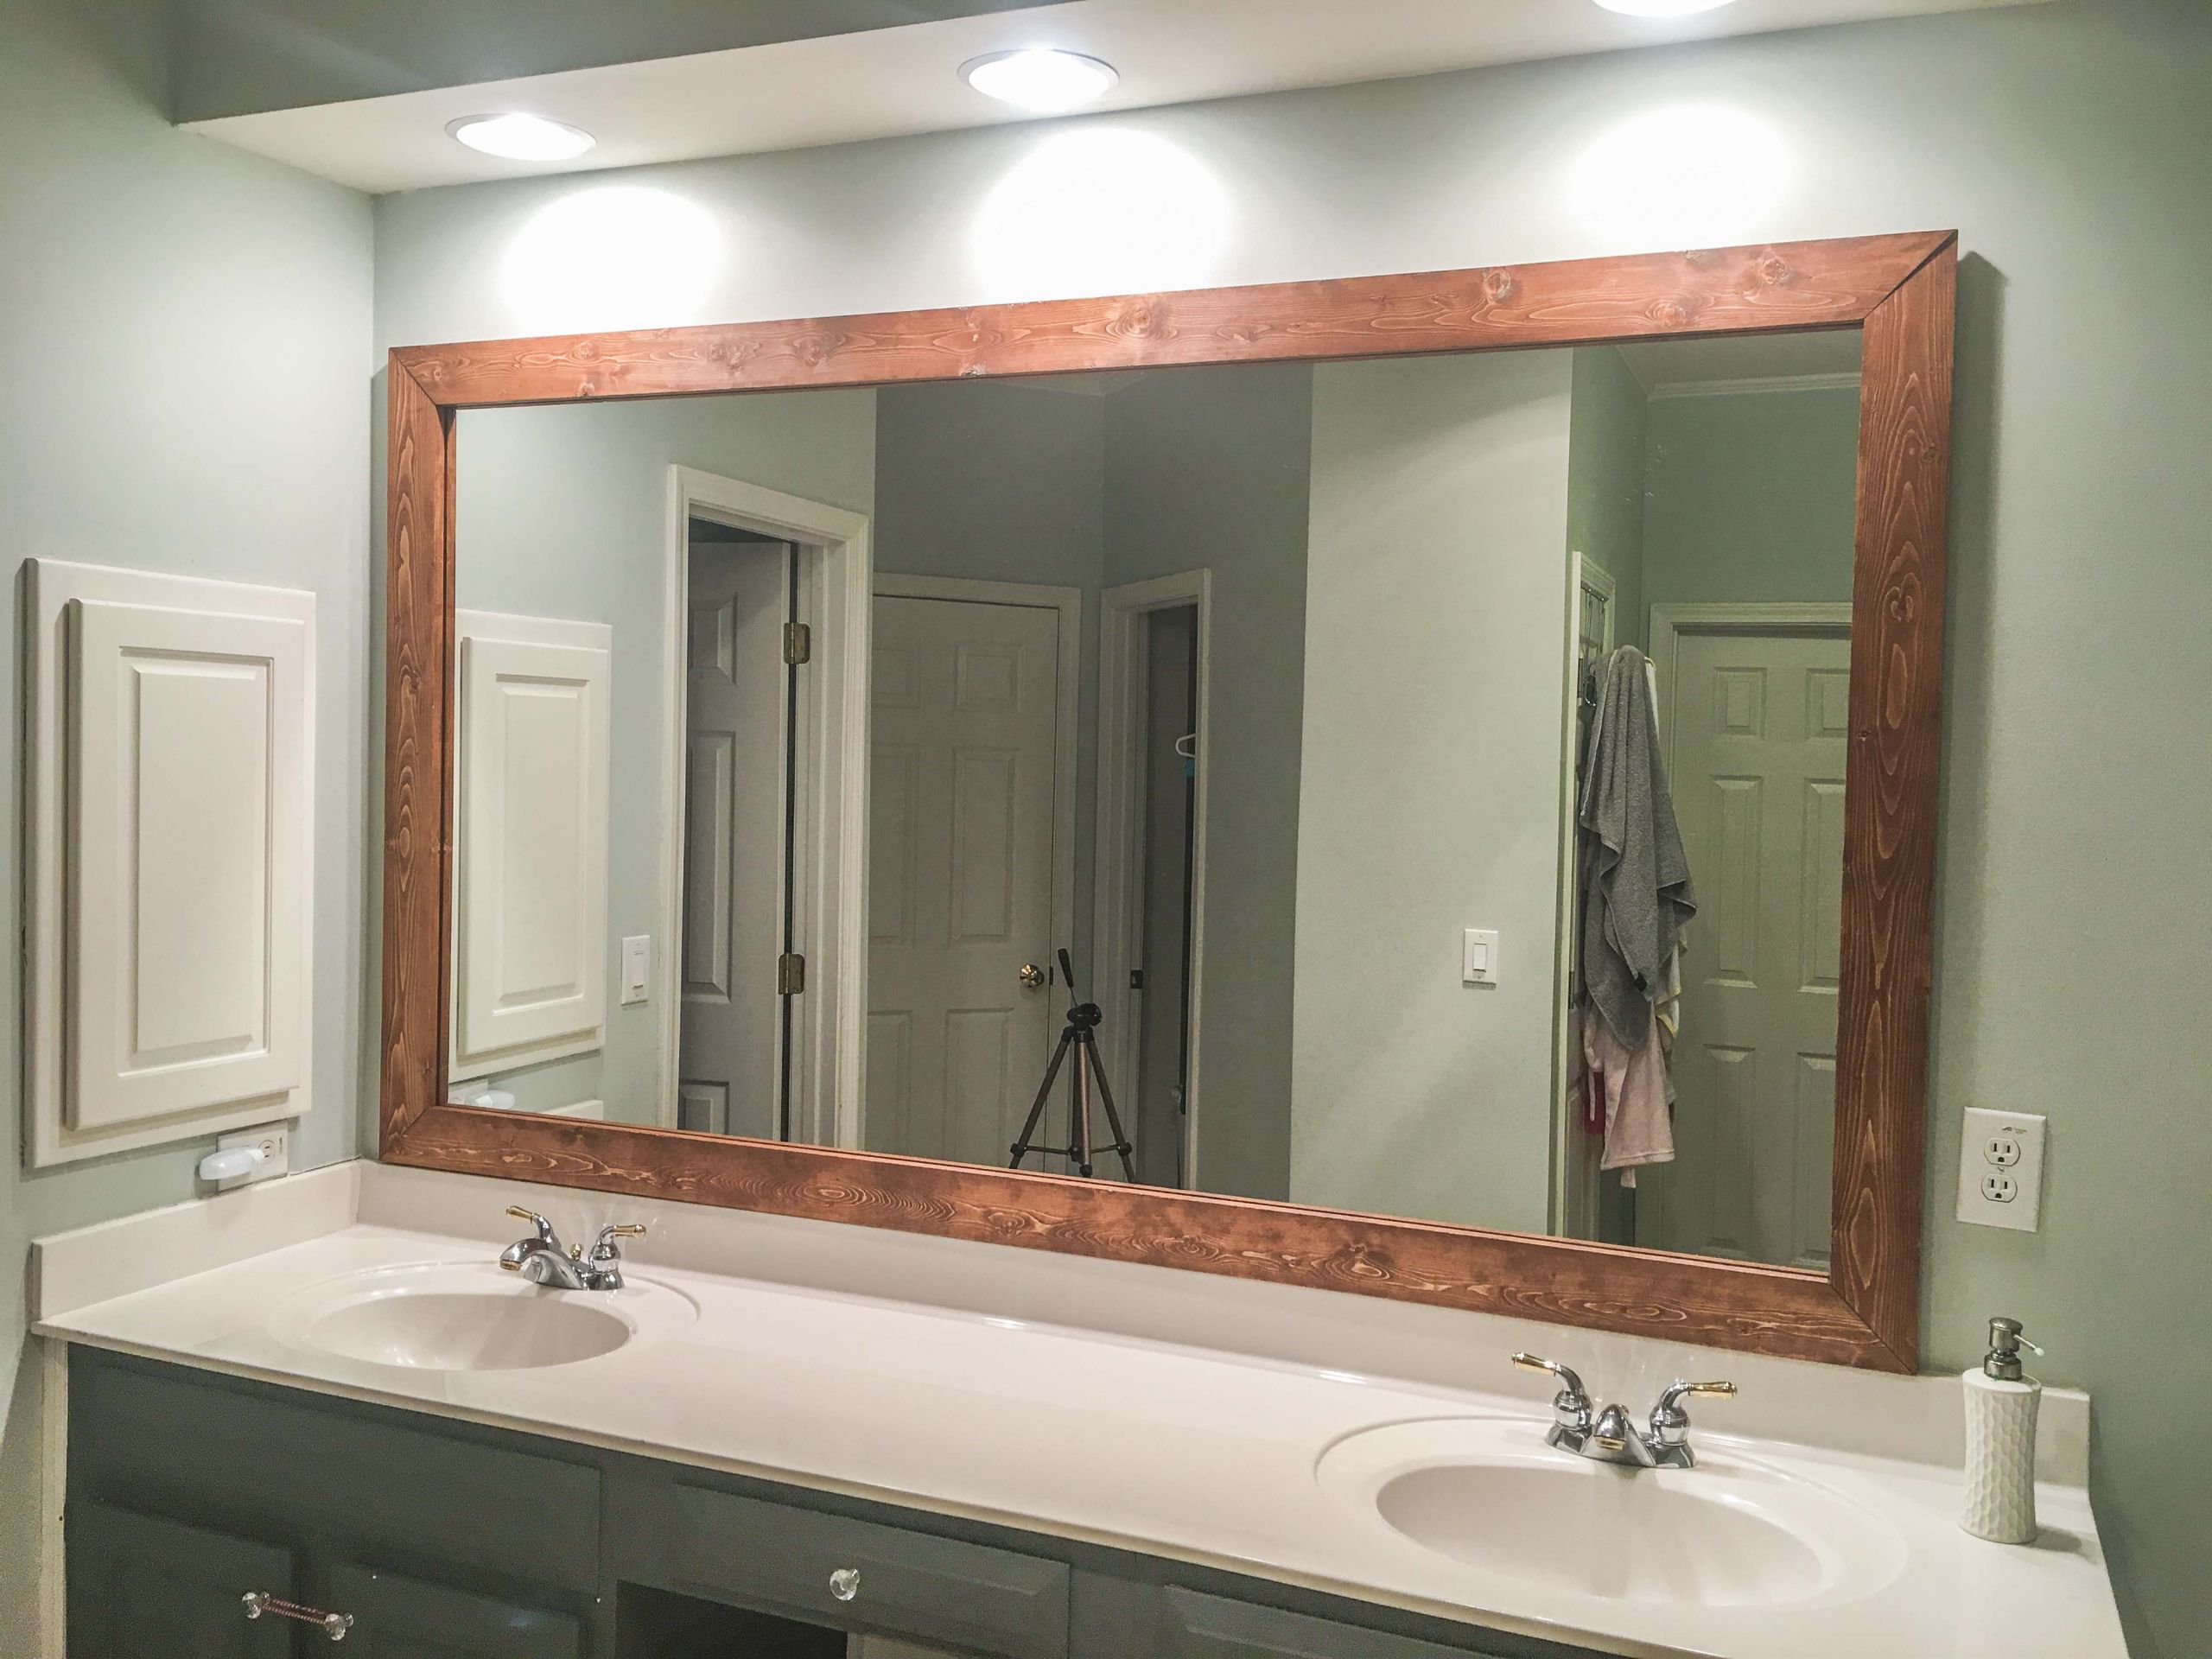 Custom Framed Bathroom Mirrors
 How to DIY Upgrade Your Bathroom Mirror With a Stained